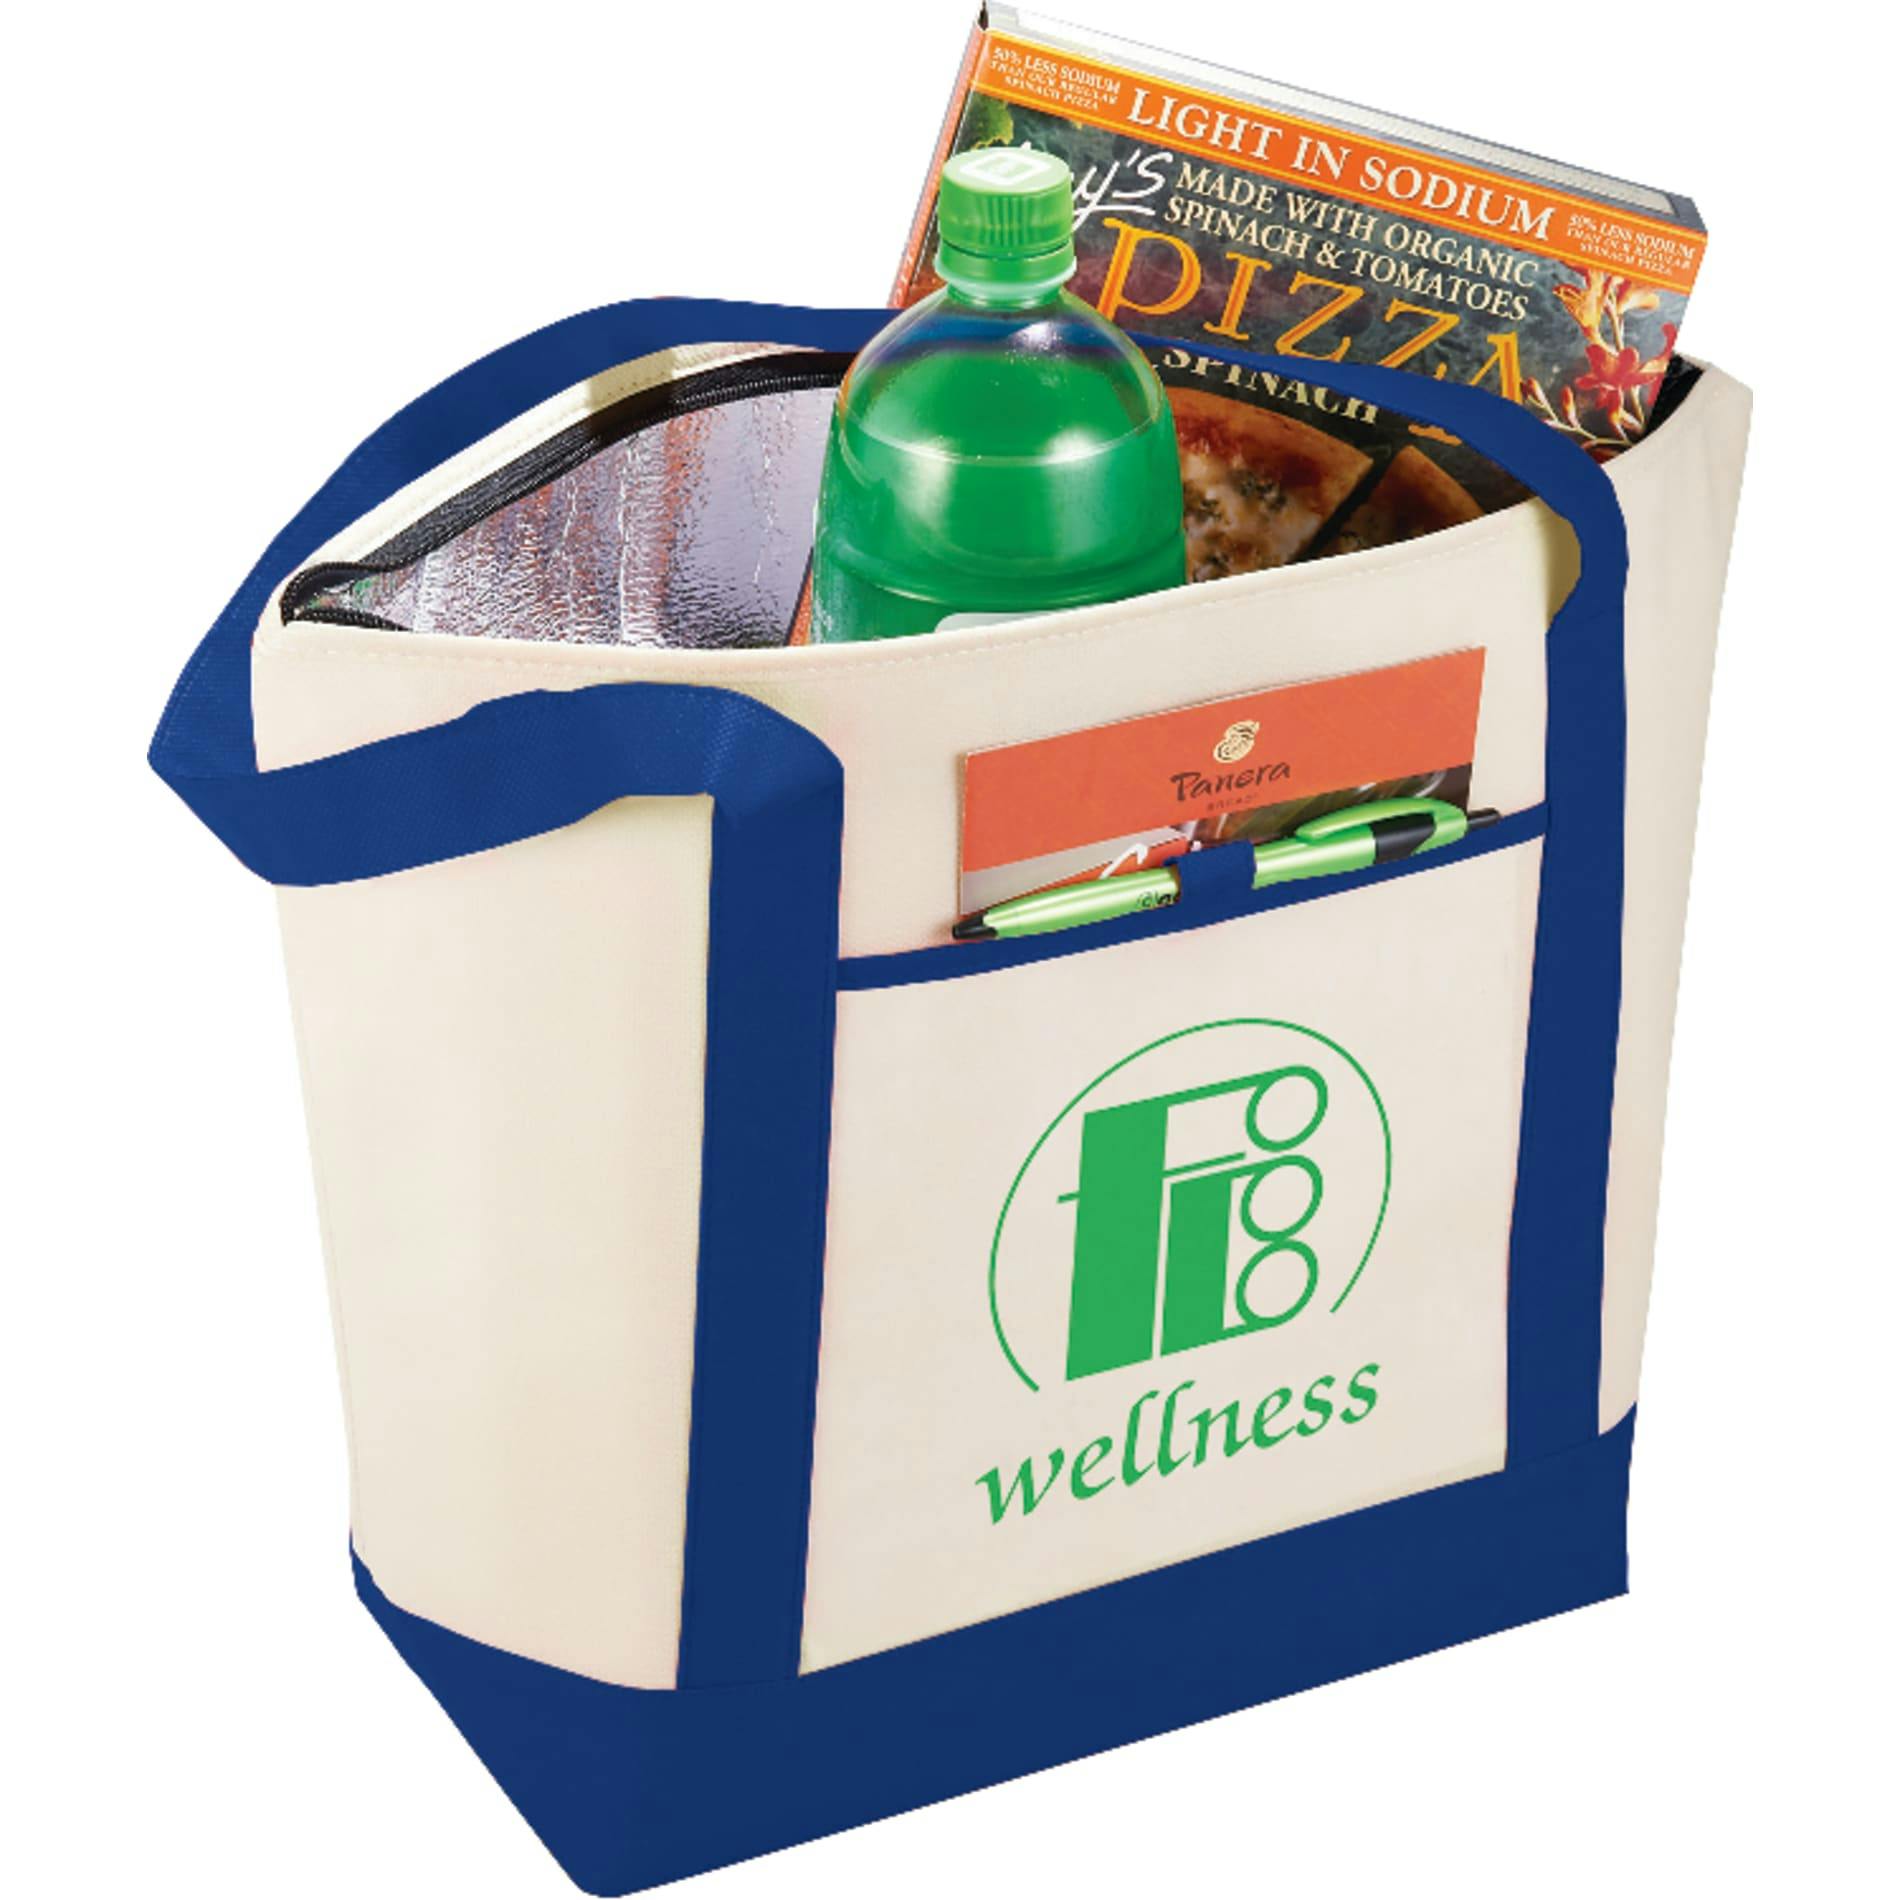 Lighthouse 24-Can Non-Woven Tote Cooler - additional Image 2